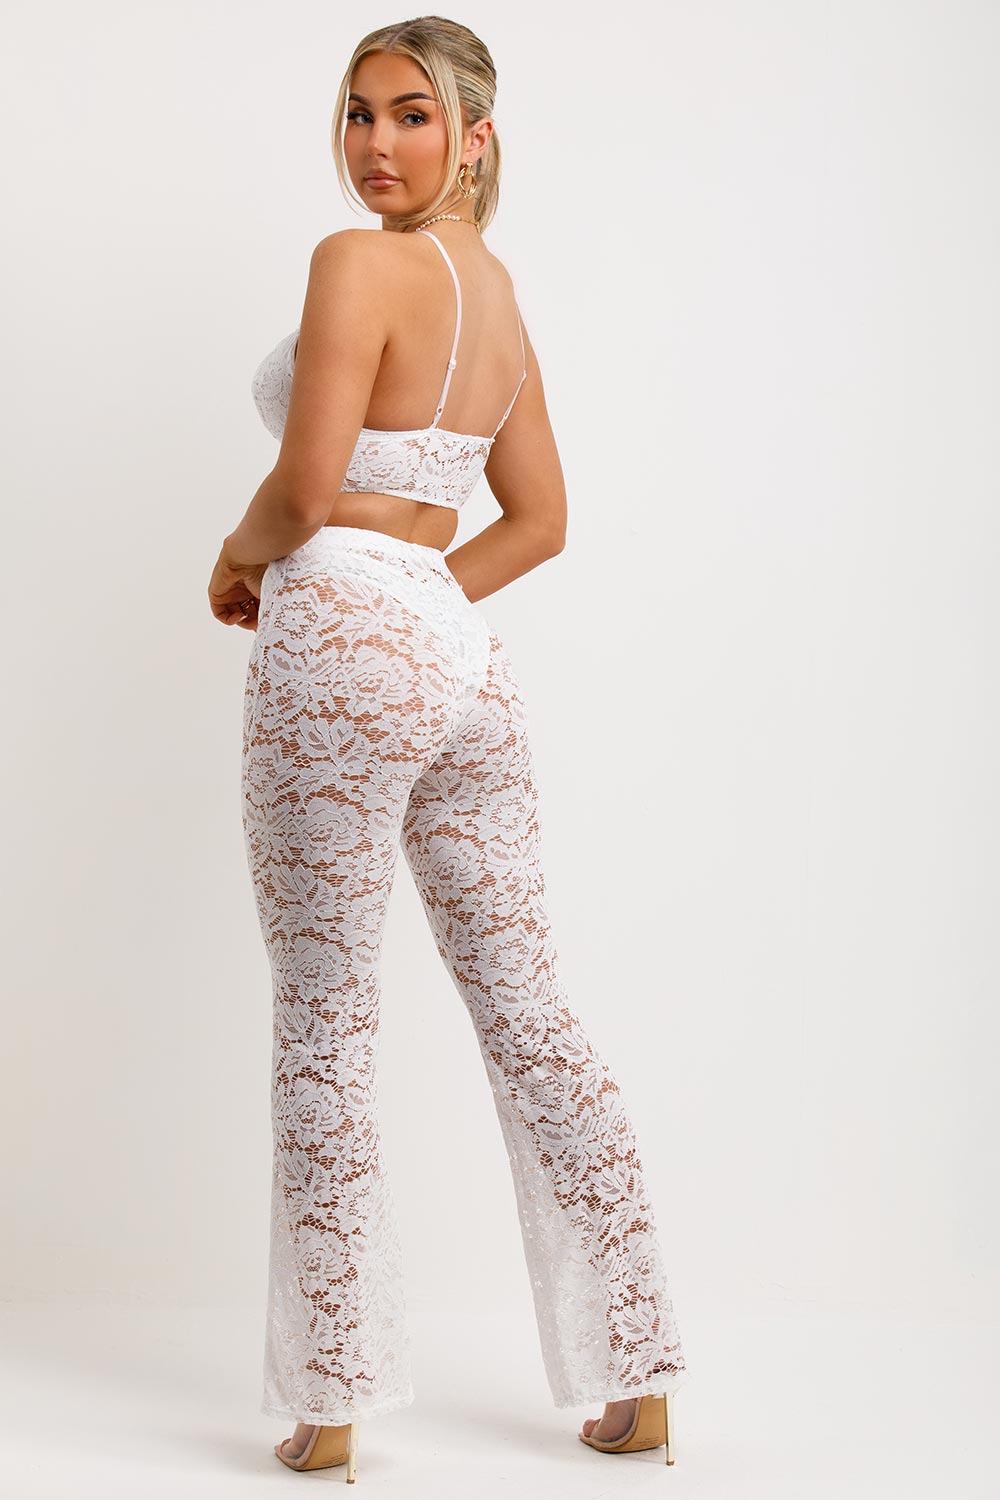 white sheer lace trousers and crop top set festival rave party outfit